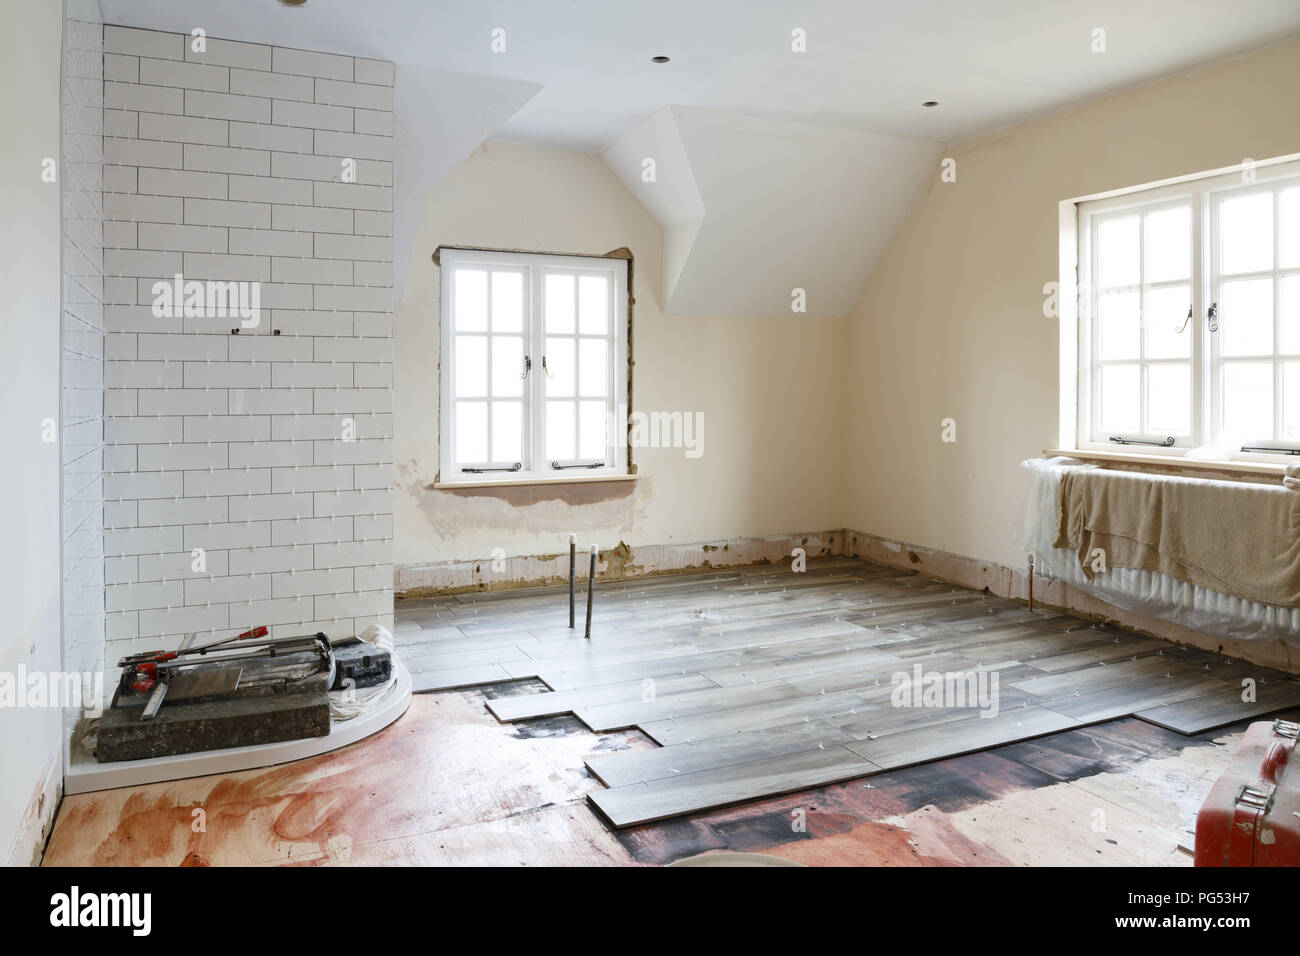 Bathroom ripout and tiling before a remodeling, refit and refurbishment Stock Photo